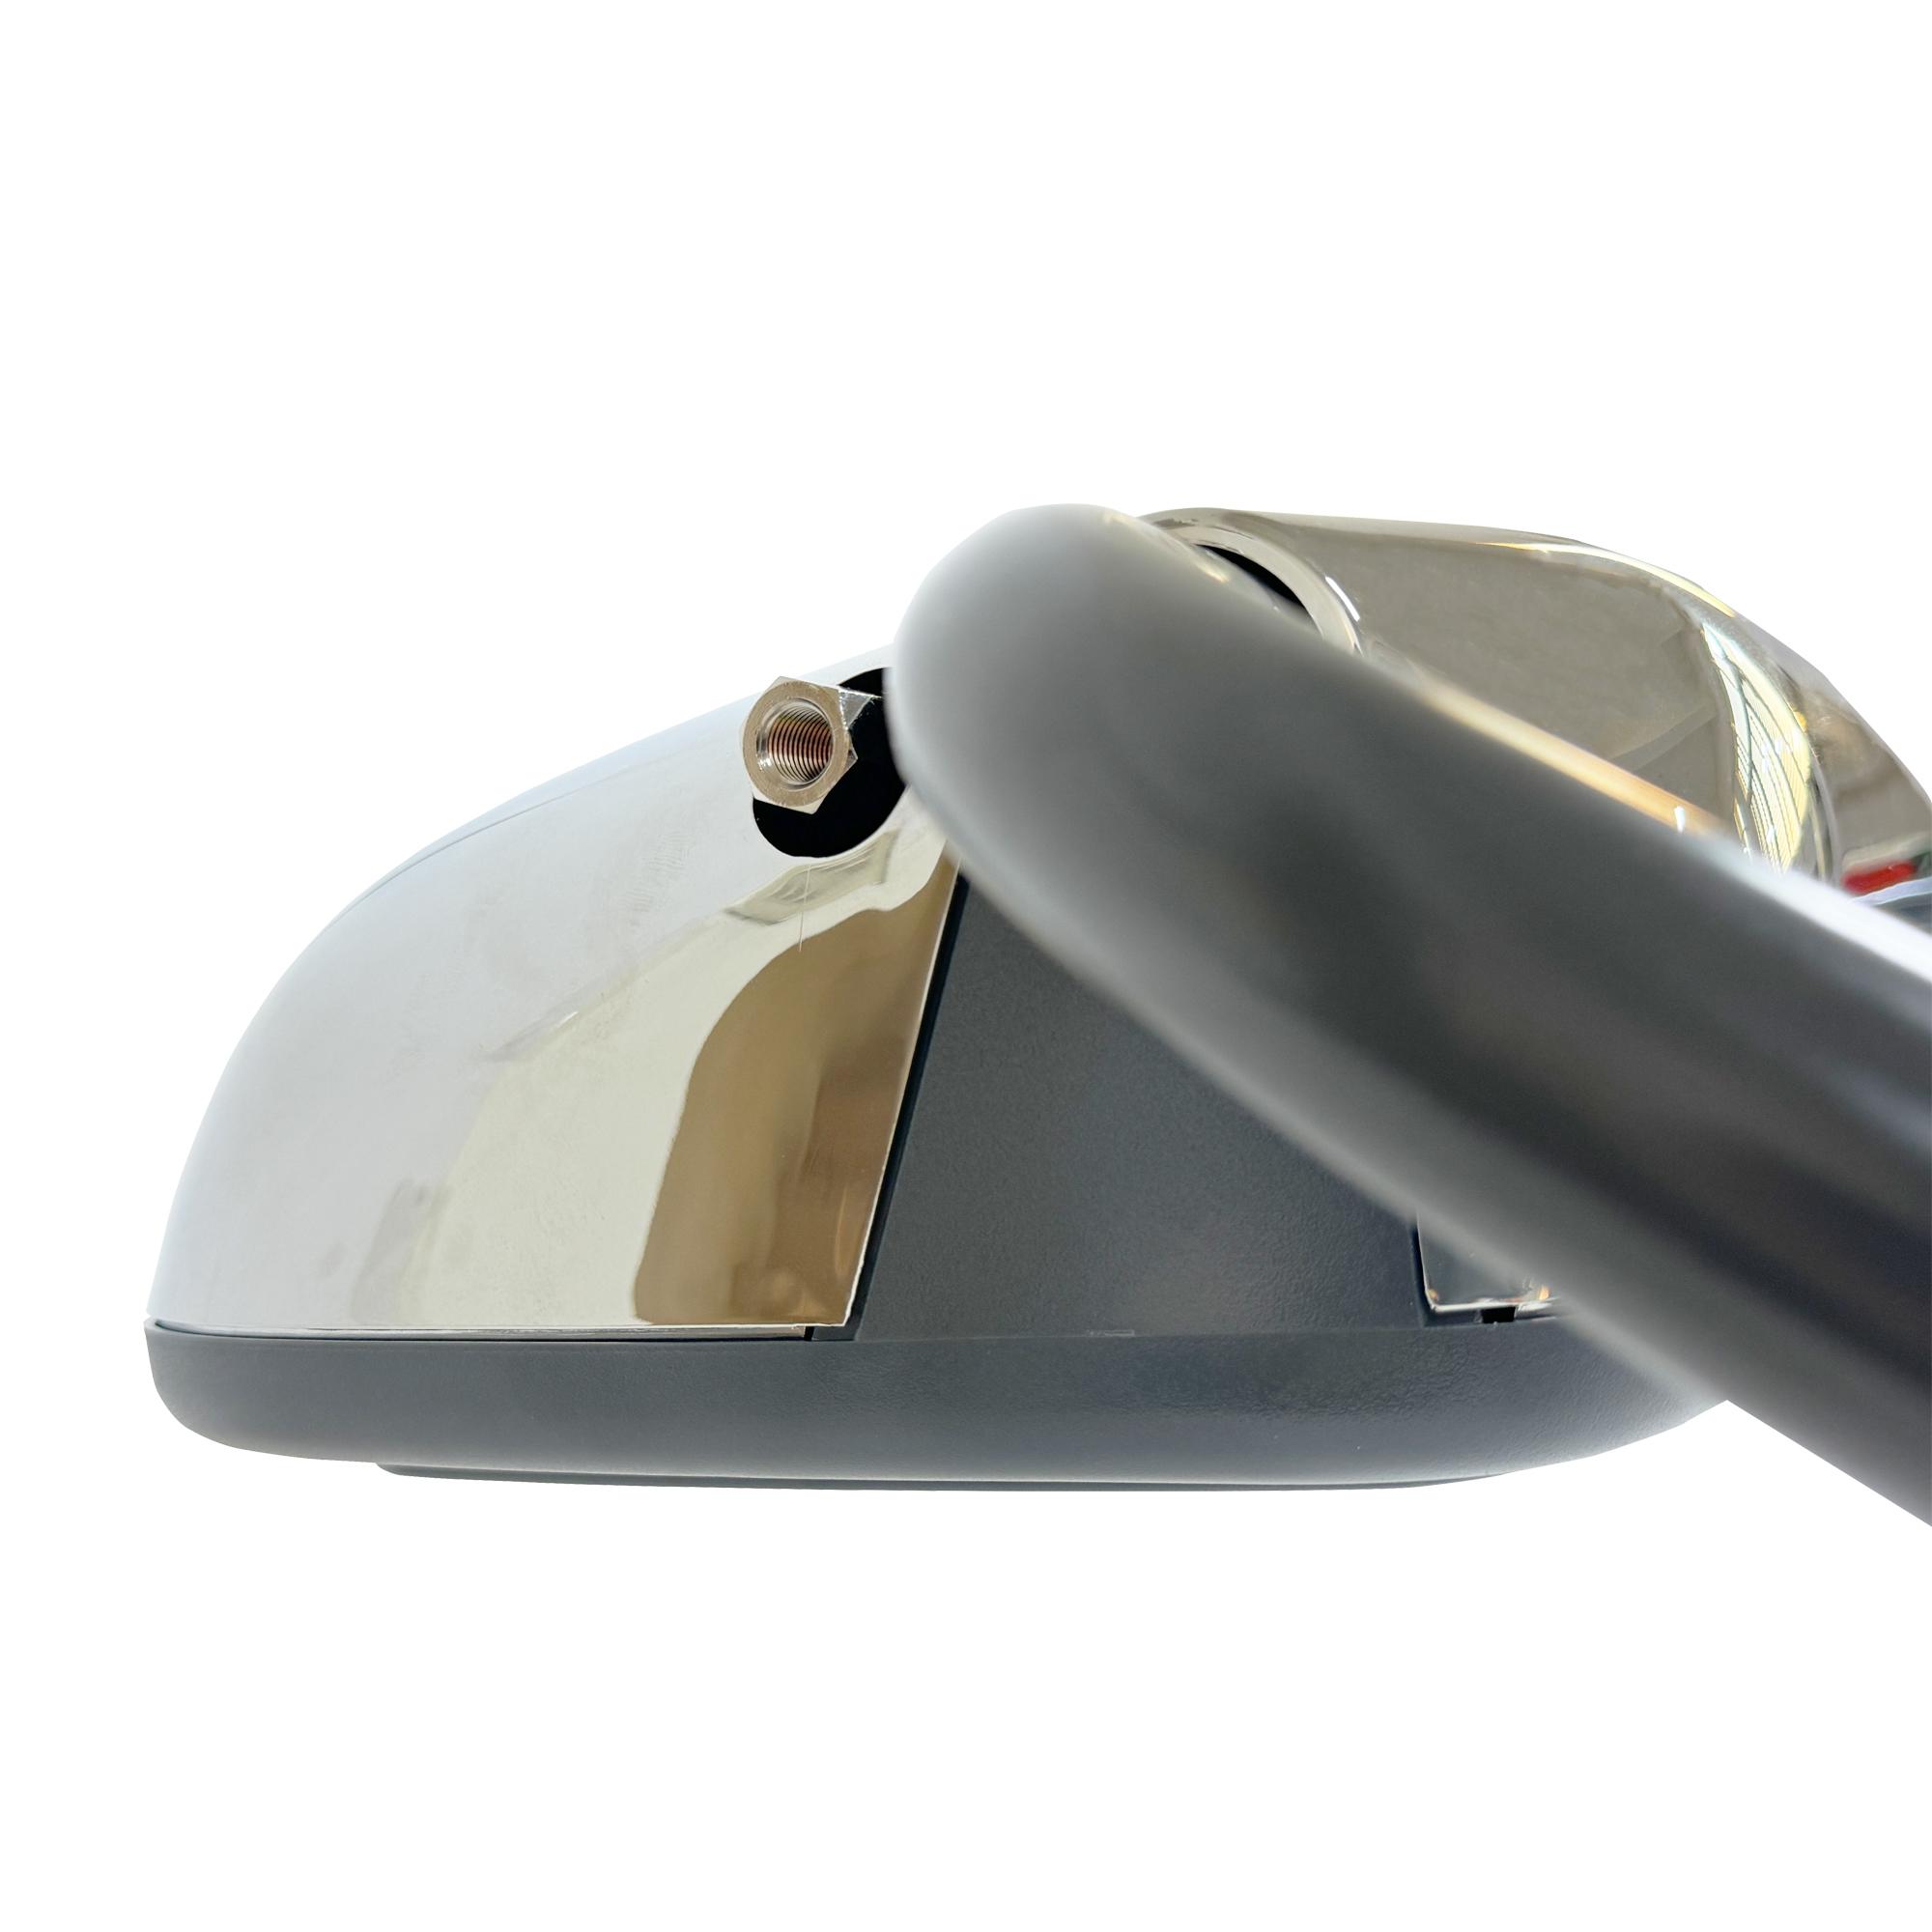 SPLENDID Replacement Side mirror, Power mirror, Heated, Chrome cover, for 2002-2015 Freightliner Columbia, 2001-2010 Freightliner Coronado, 1996-2010 Freightliner Century, Driver Side